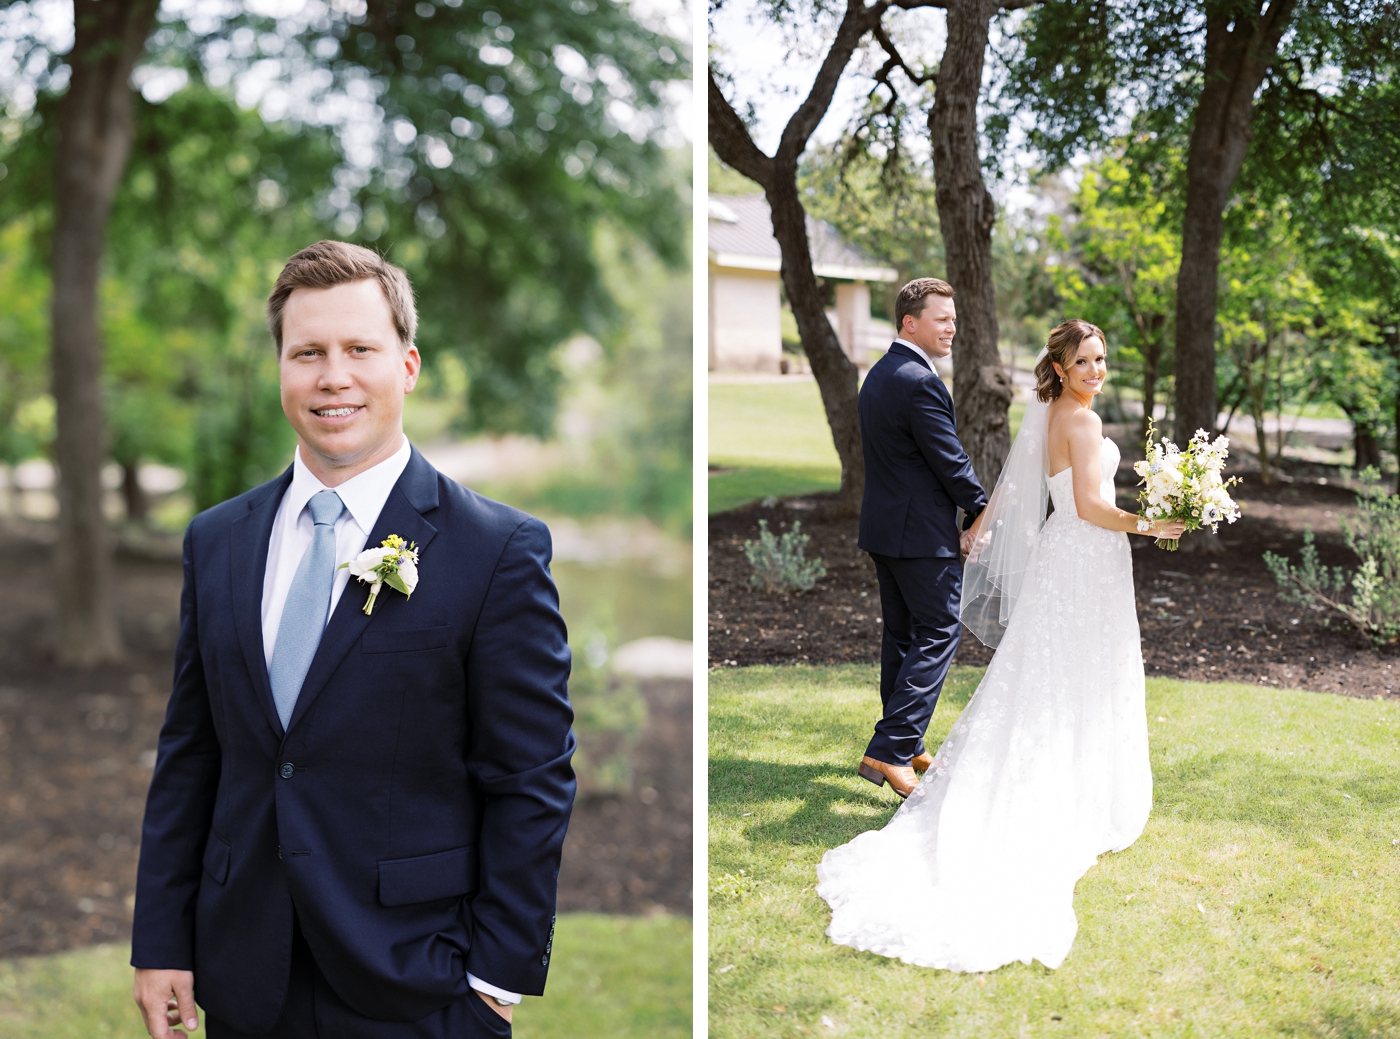 Bride and groom wedding day pictures at Omni Barton Creek